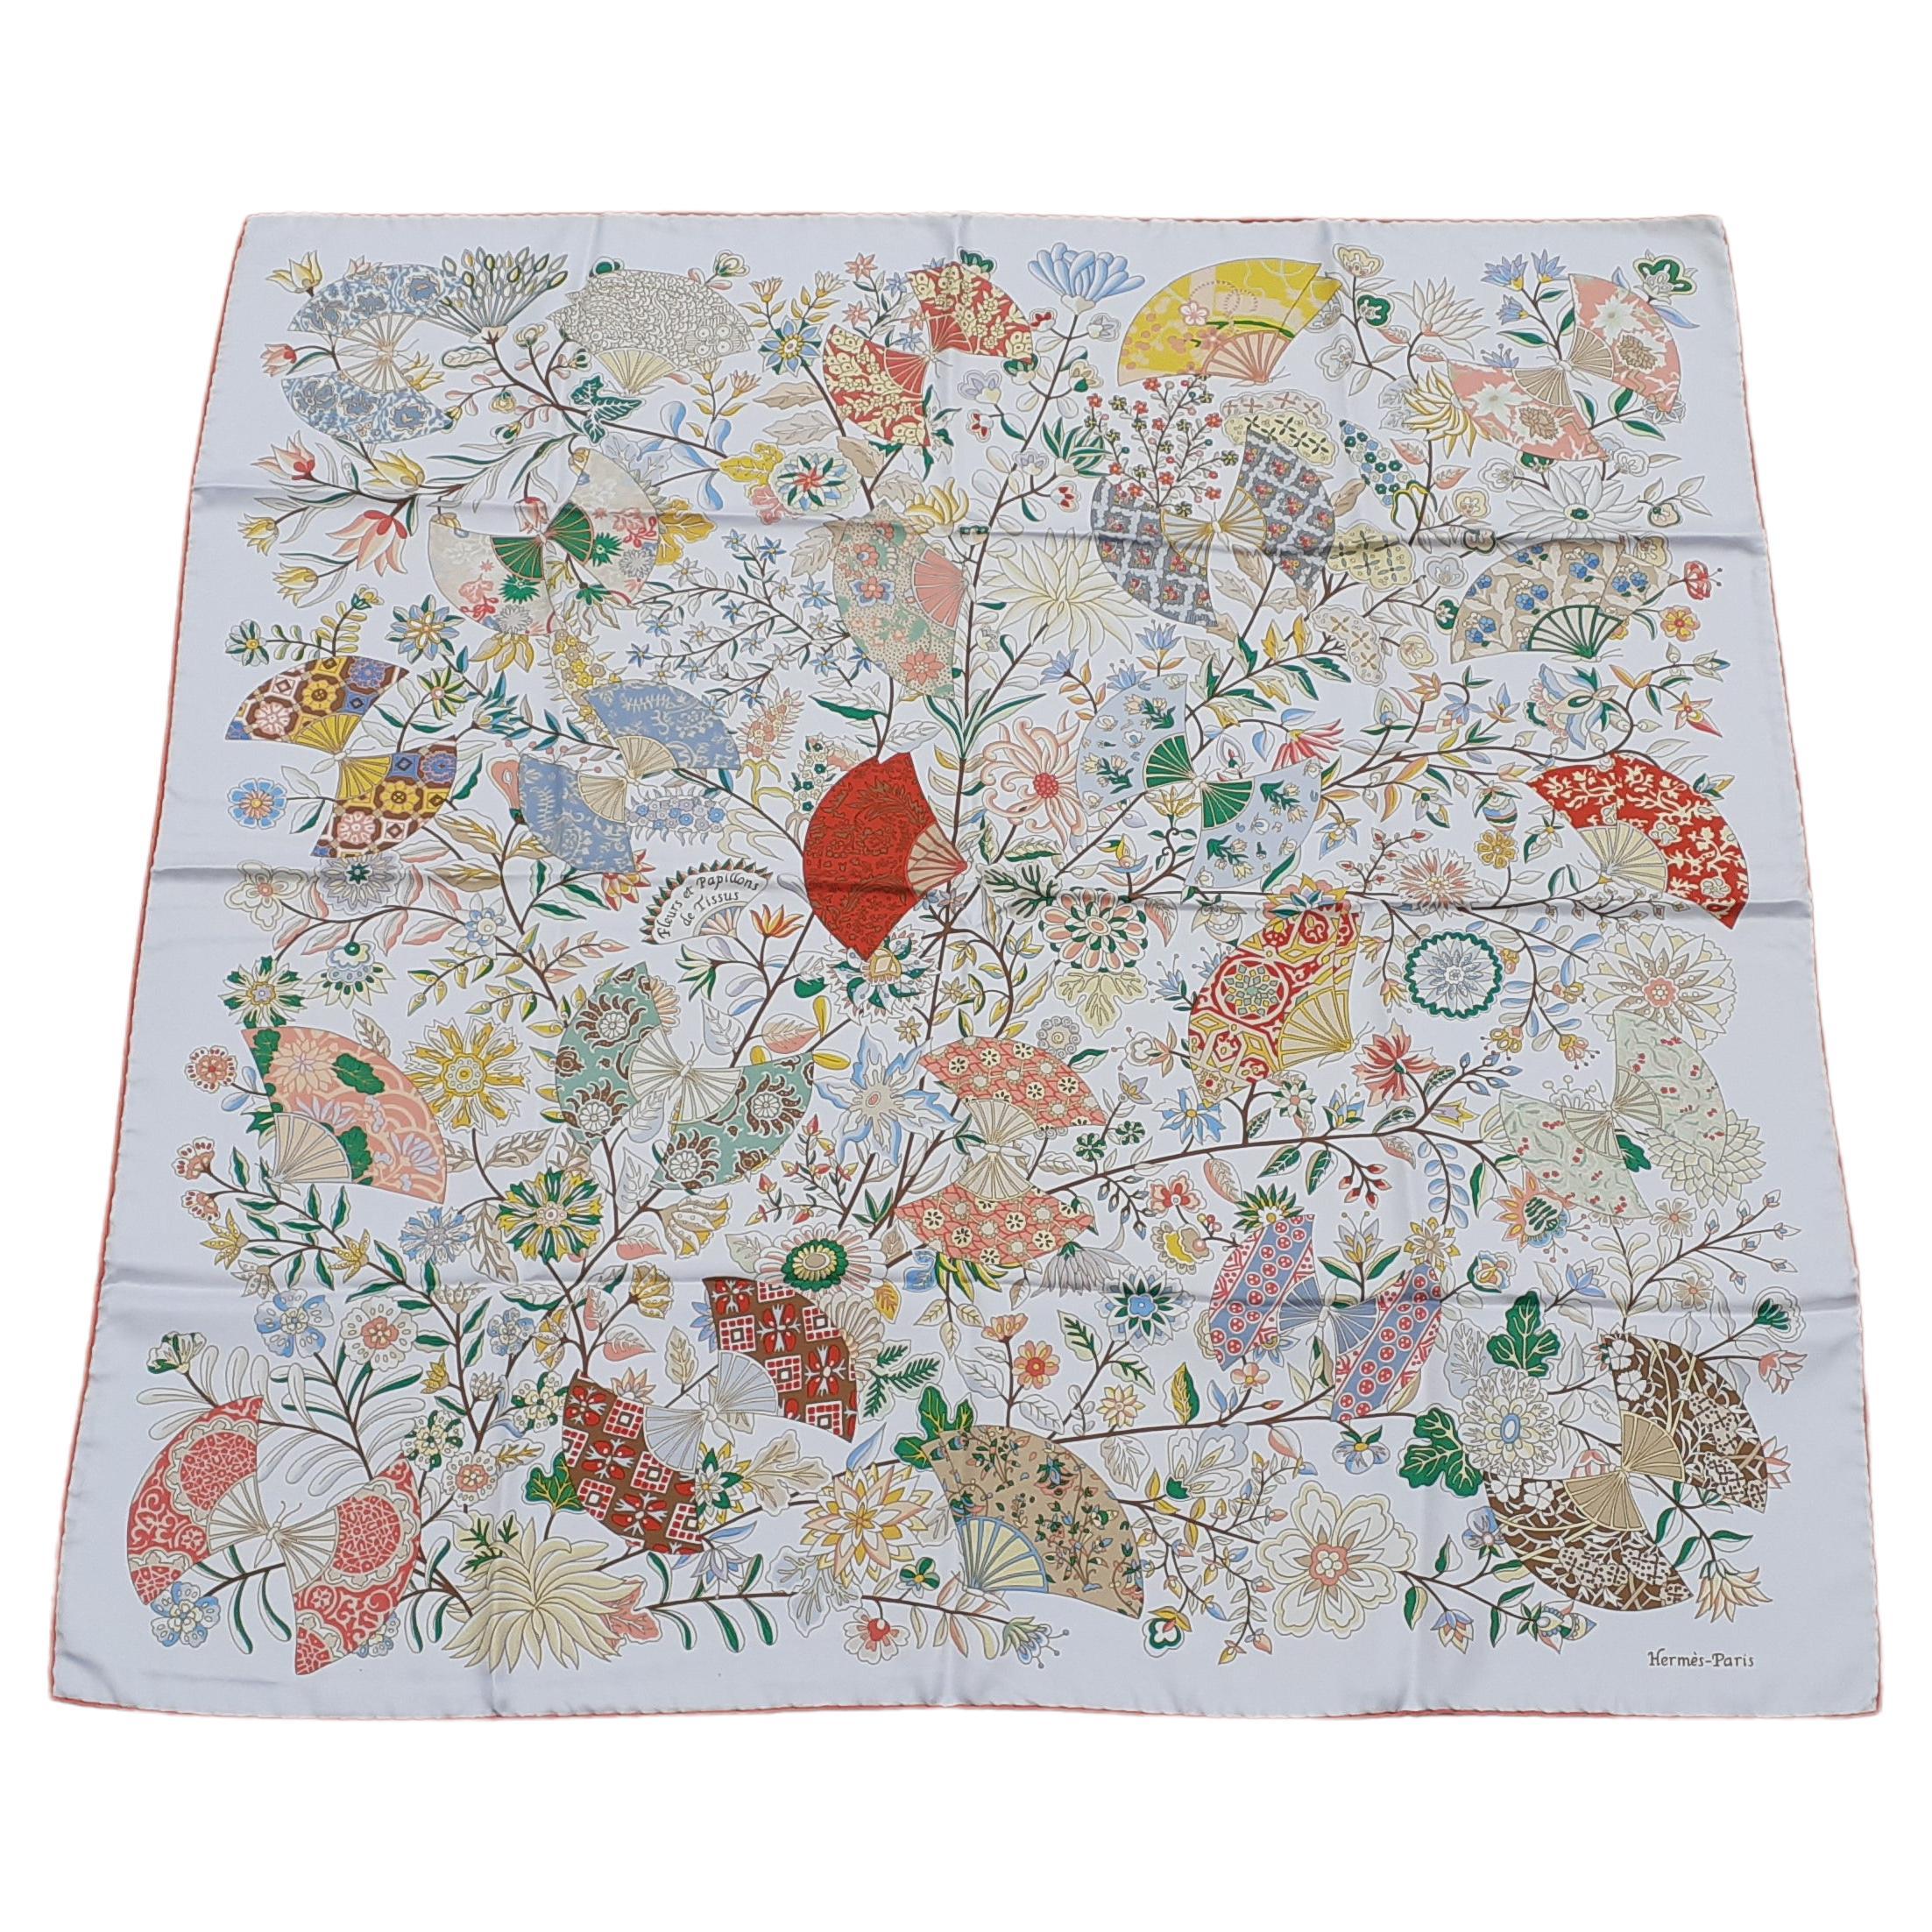 Absolutely Gorgeous Authentic Hermès Scarf

Print: 